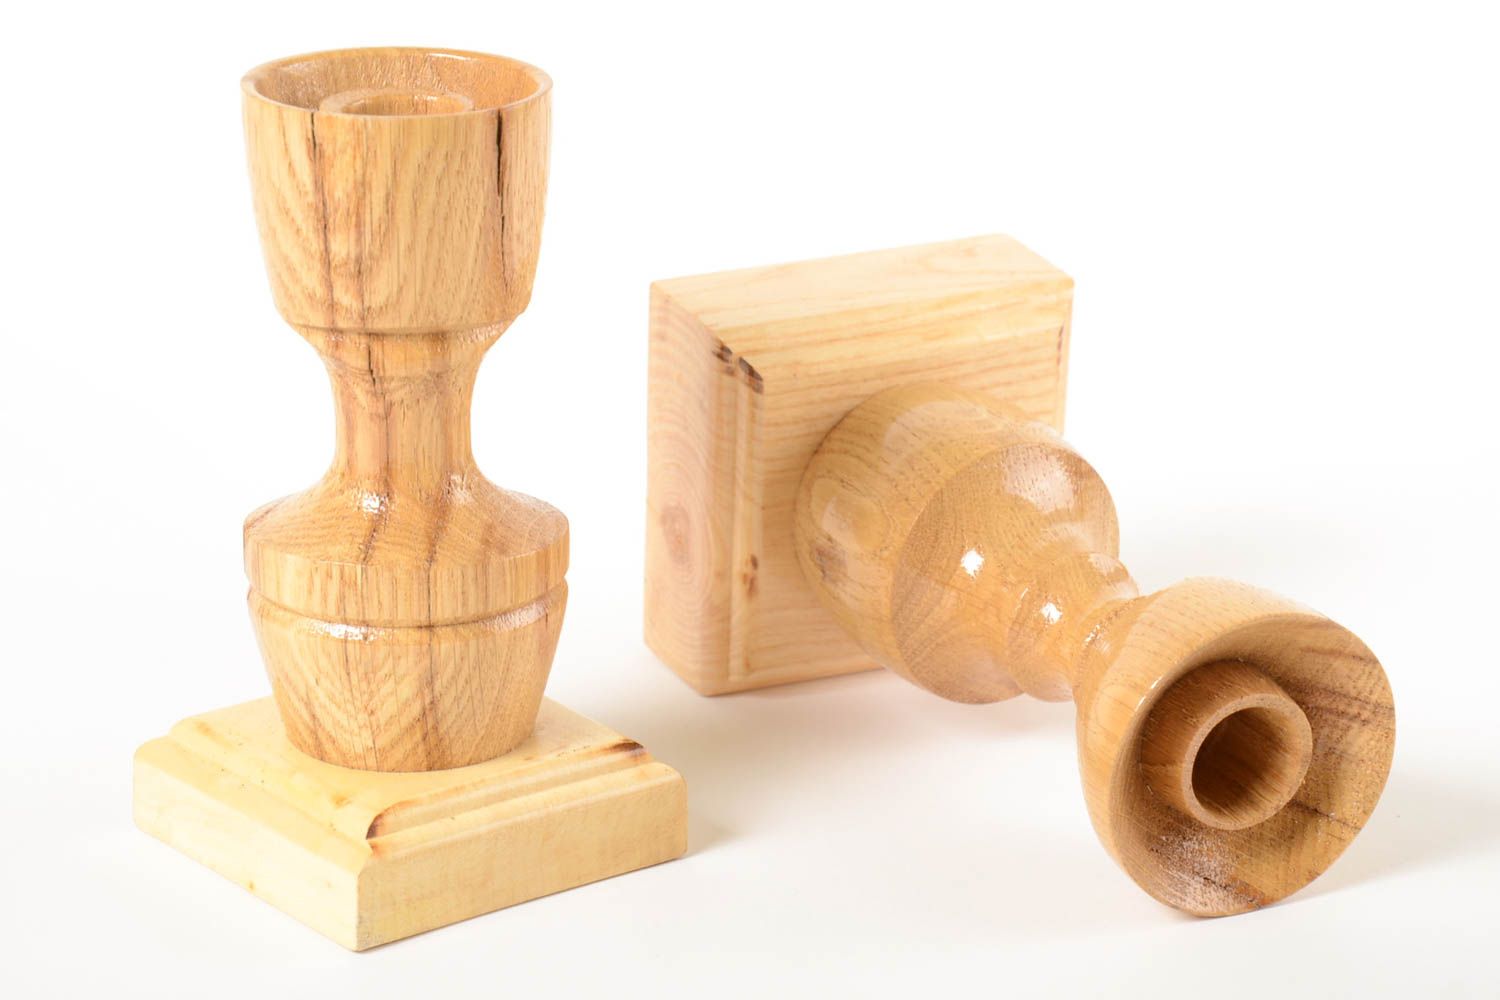 Unusual handmade wooden candlesticks 2 pieces candle holder design gift ideas photo 4